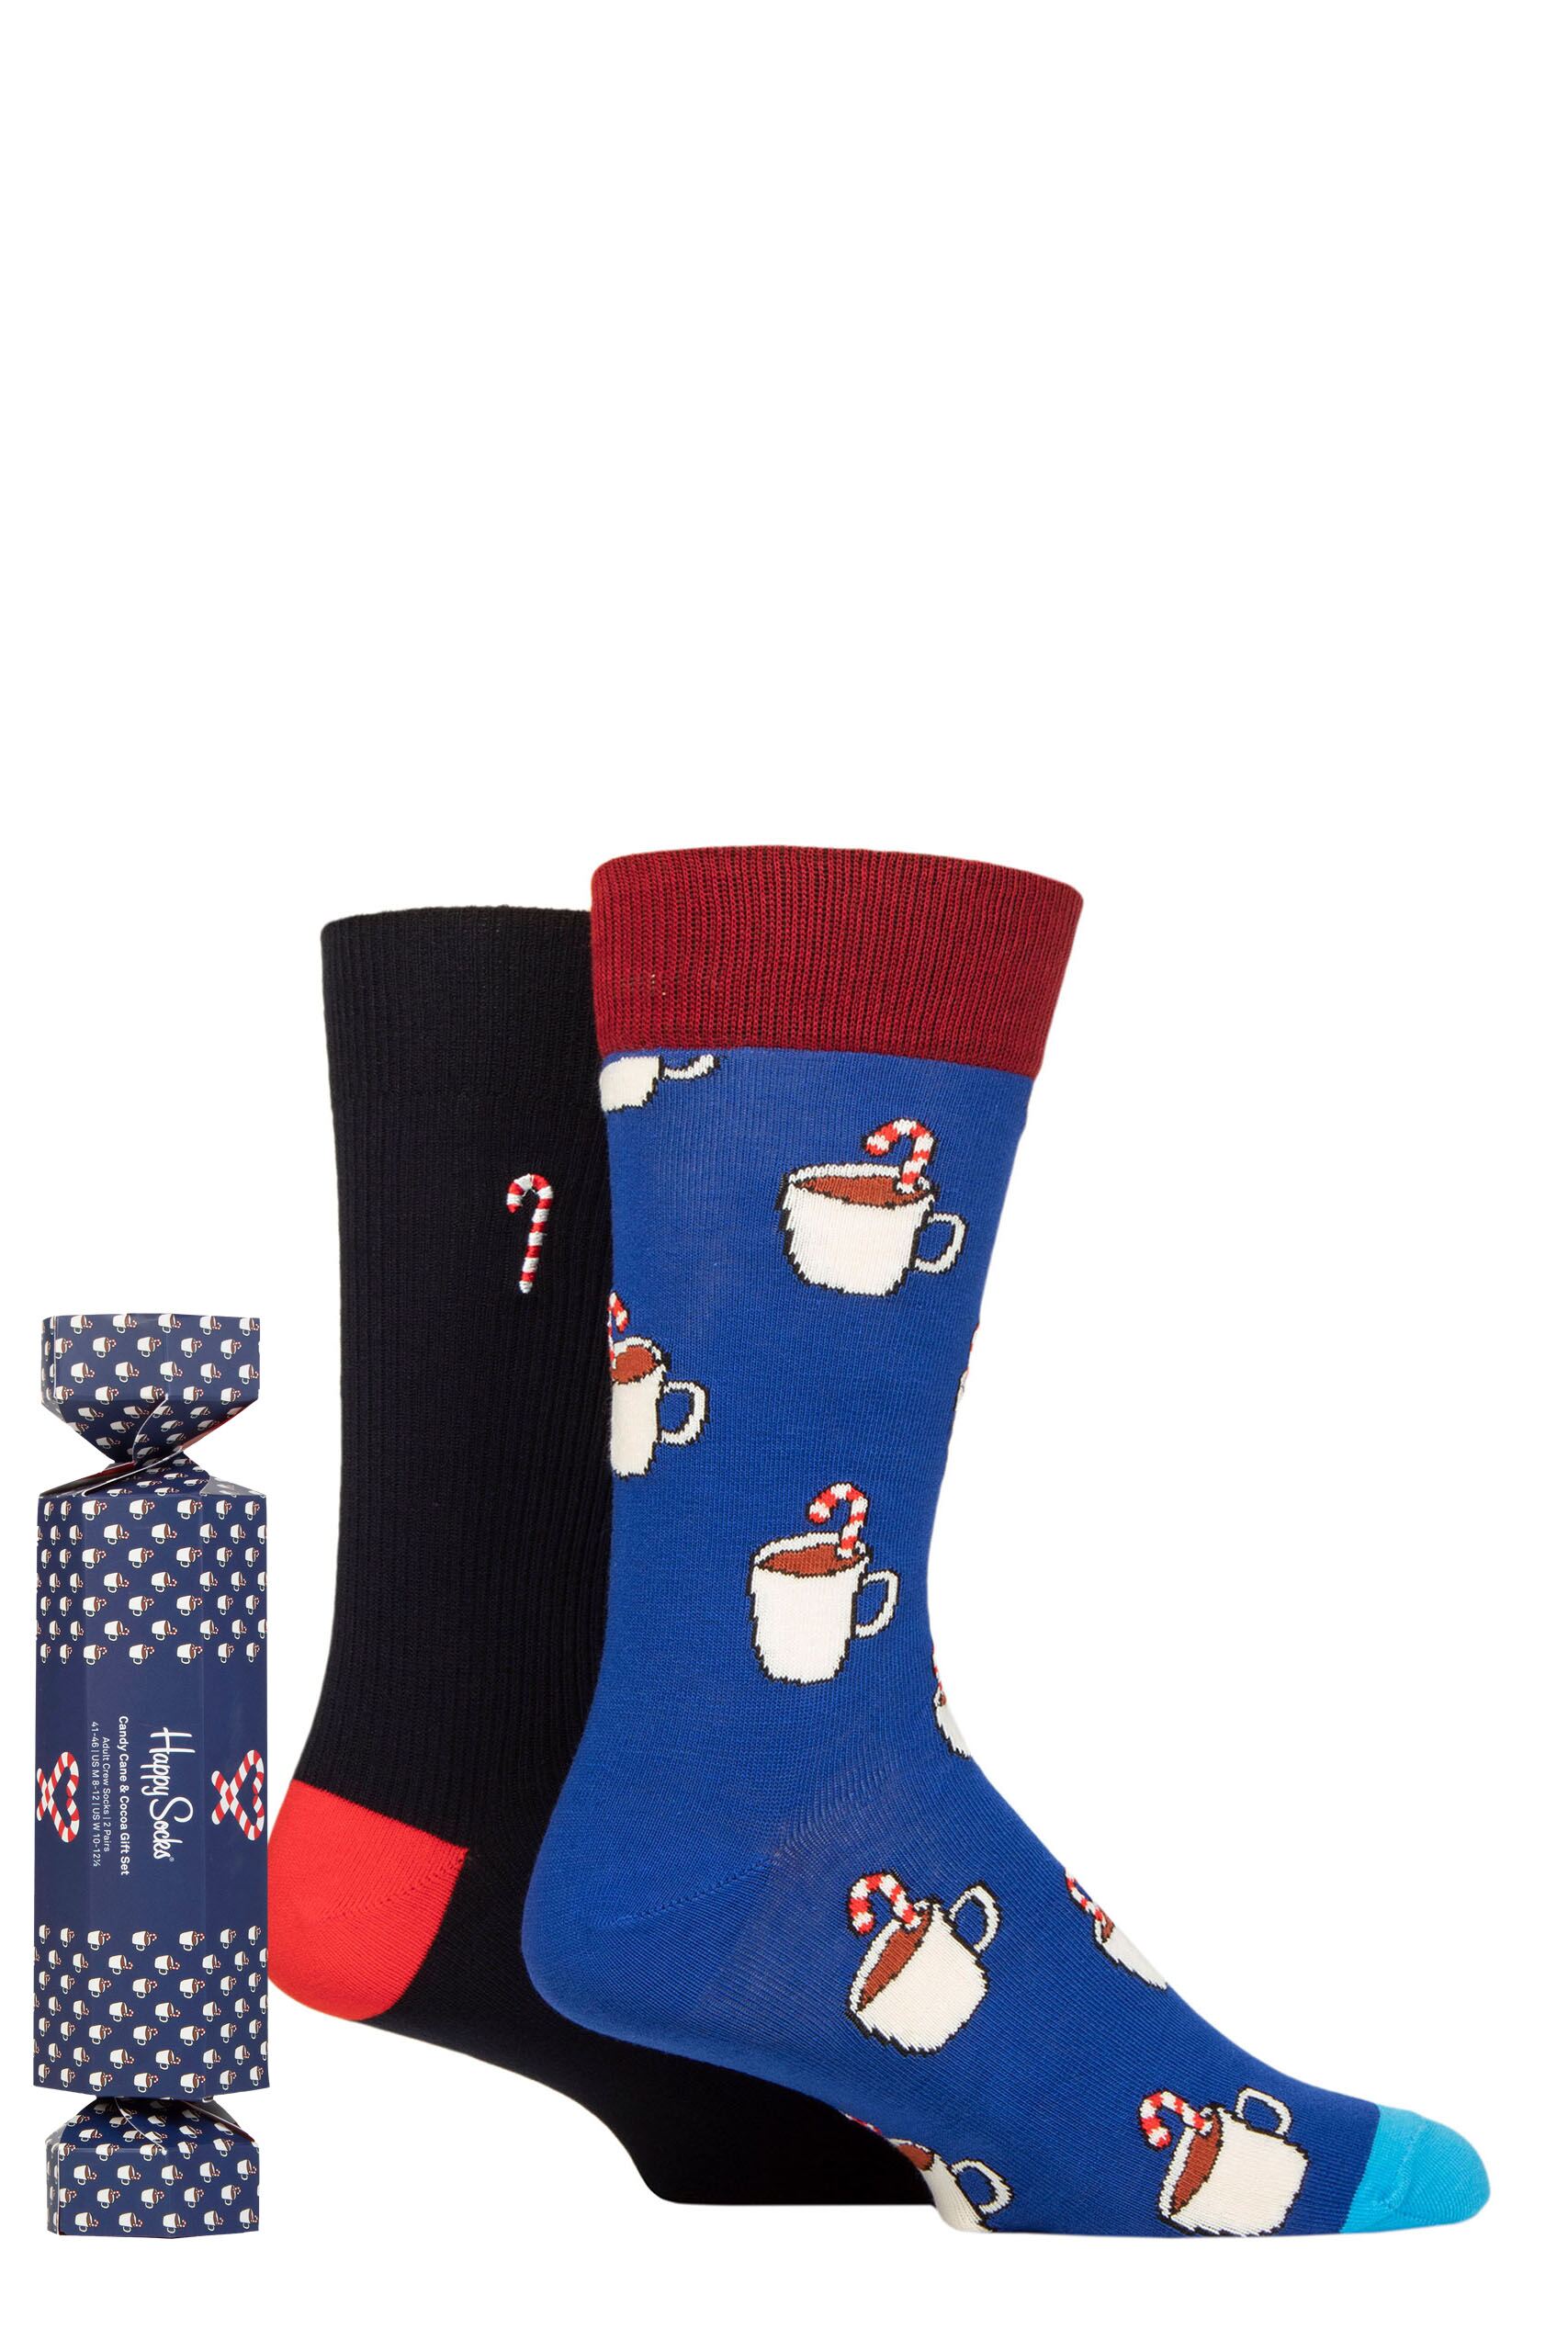 Mens and Ladies 2 Pair Happy Socks Candy Cane & Cocoa Gift Boxed Socks Multi 7.5-11.5 Unisex